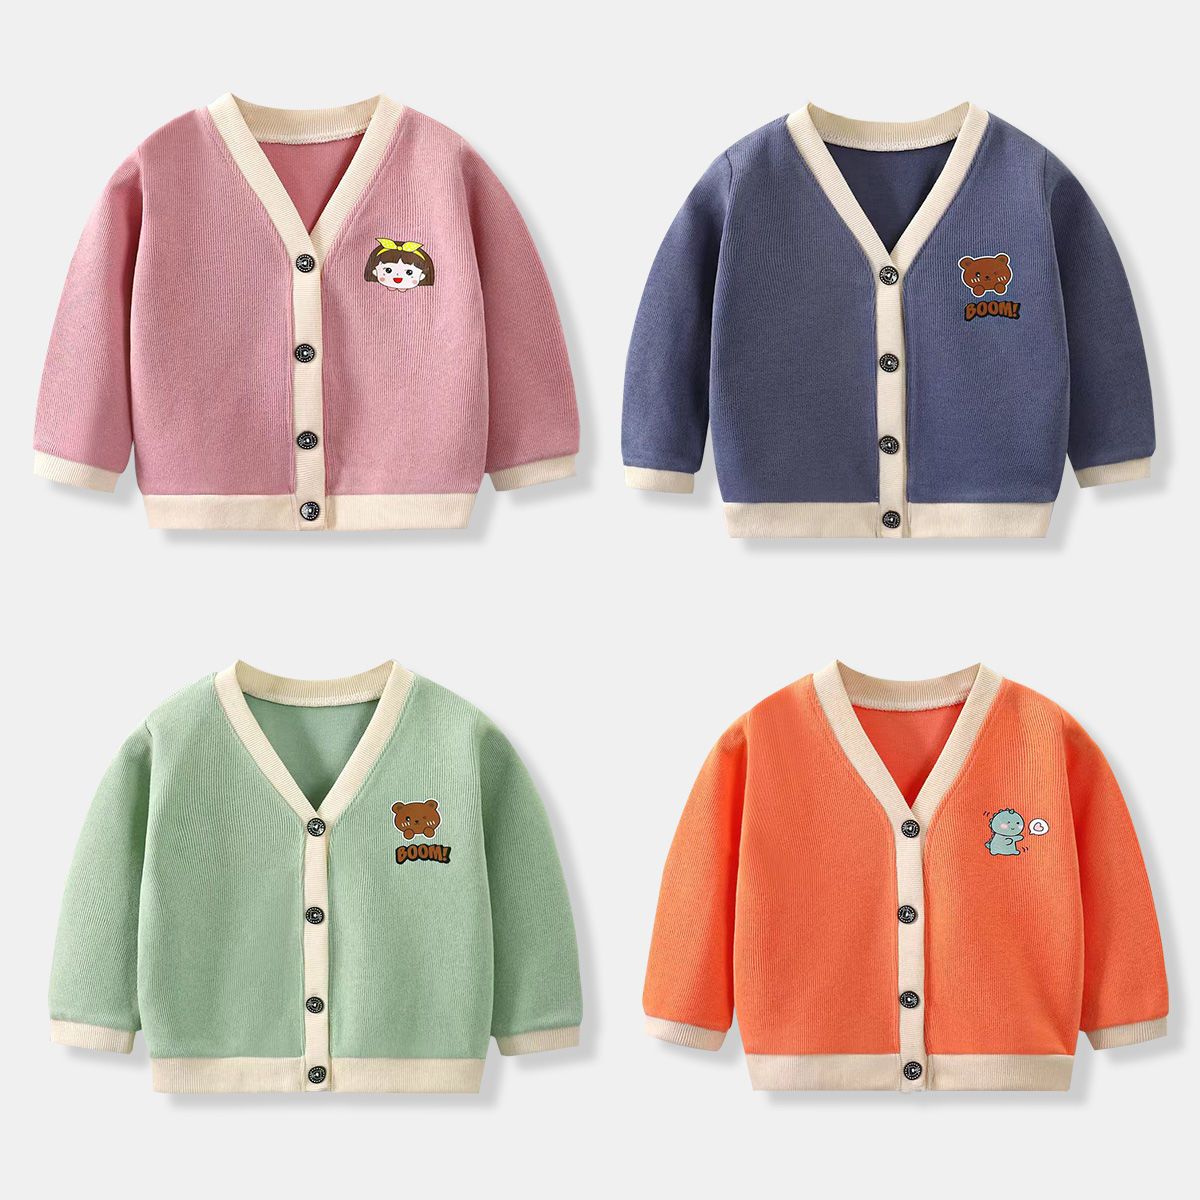 New children's knitted jackets for boys and girls, spring and autumn Korean style bottoming shirts, cardigans, baby fashion knitted sweaters tops